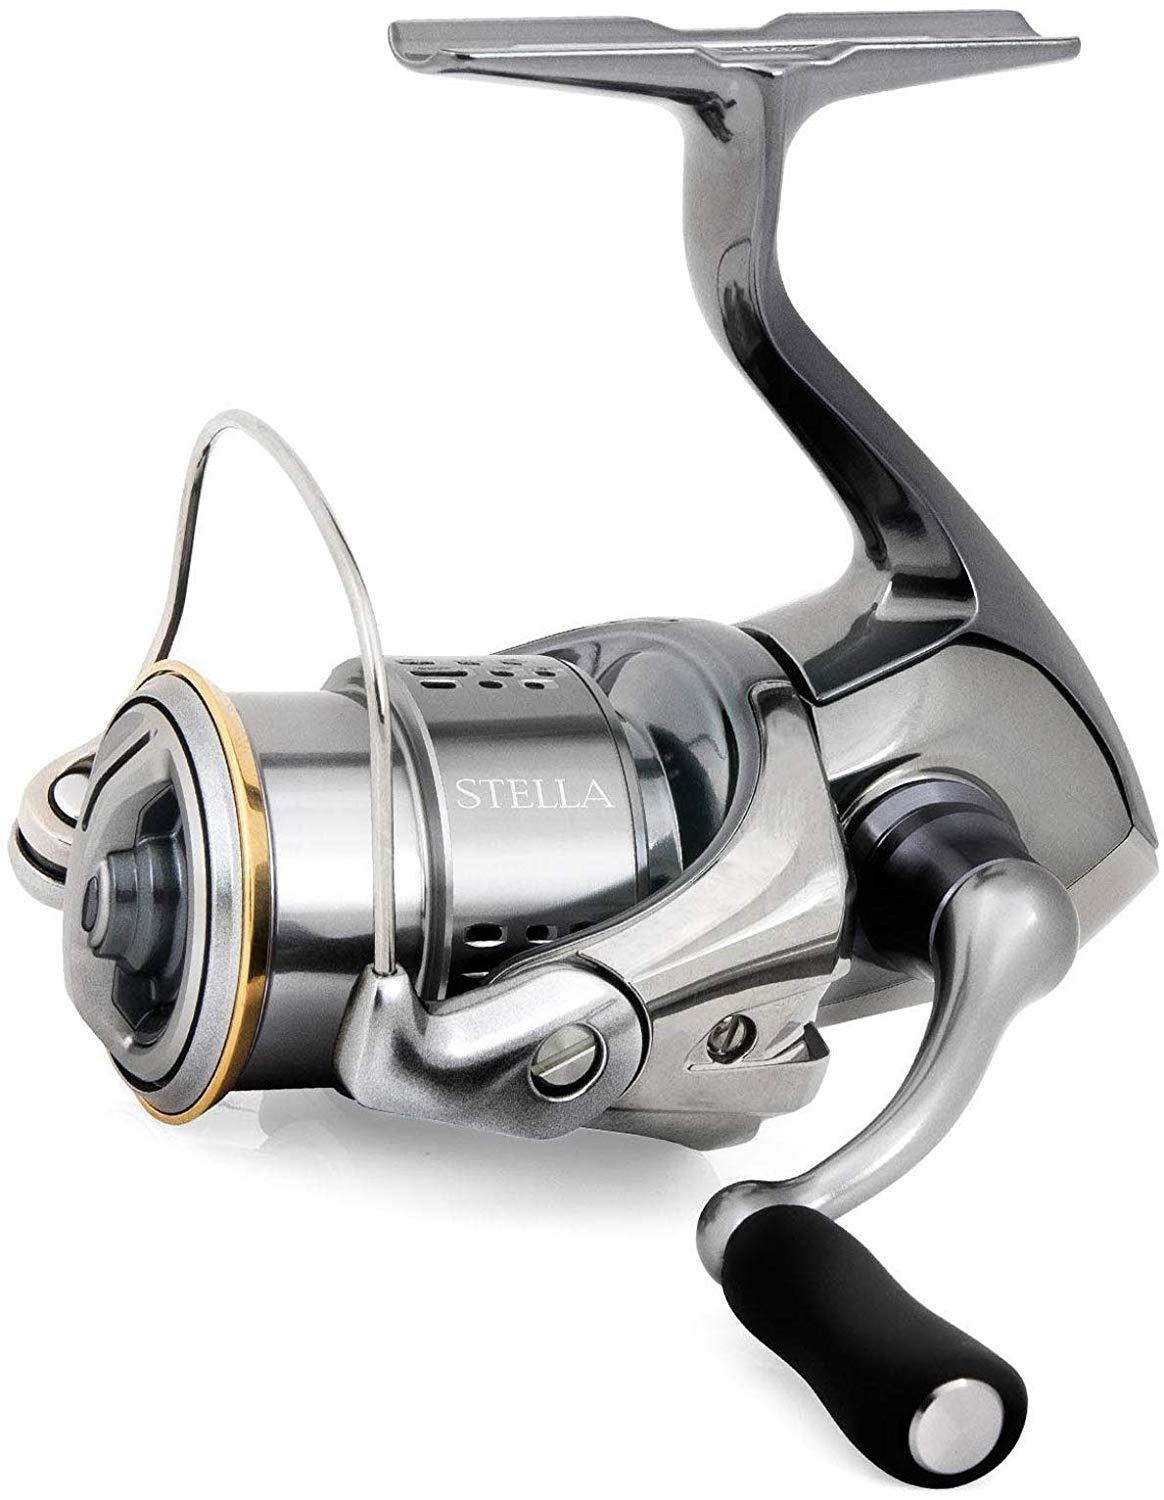 Just How Good Is The 22 Shimano Stella FK 1000? #shimano